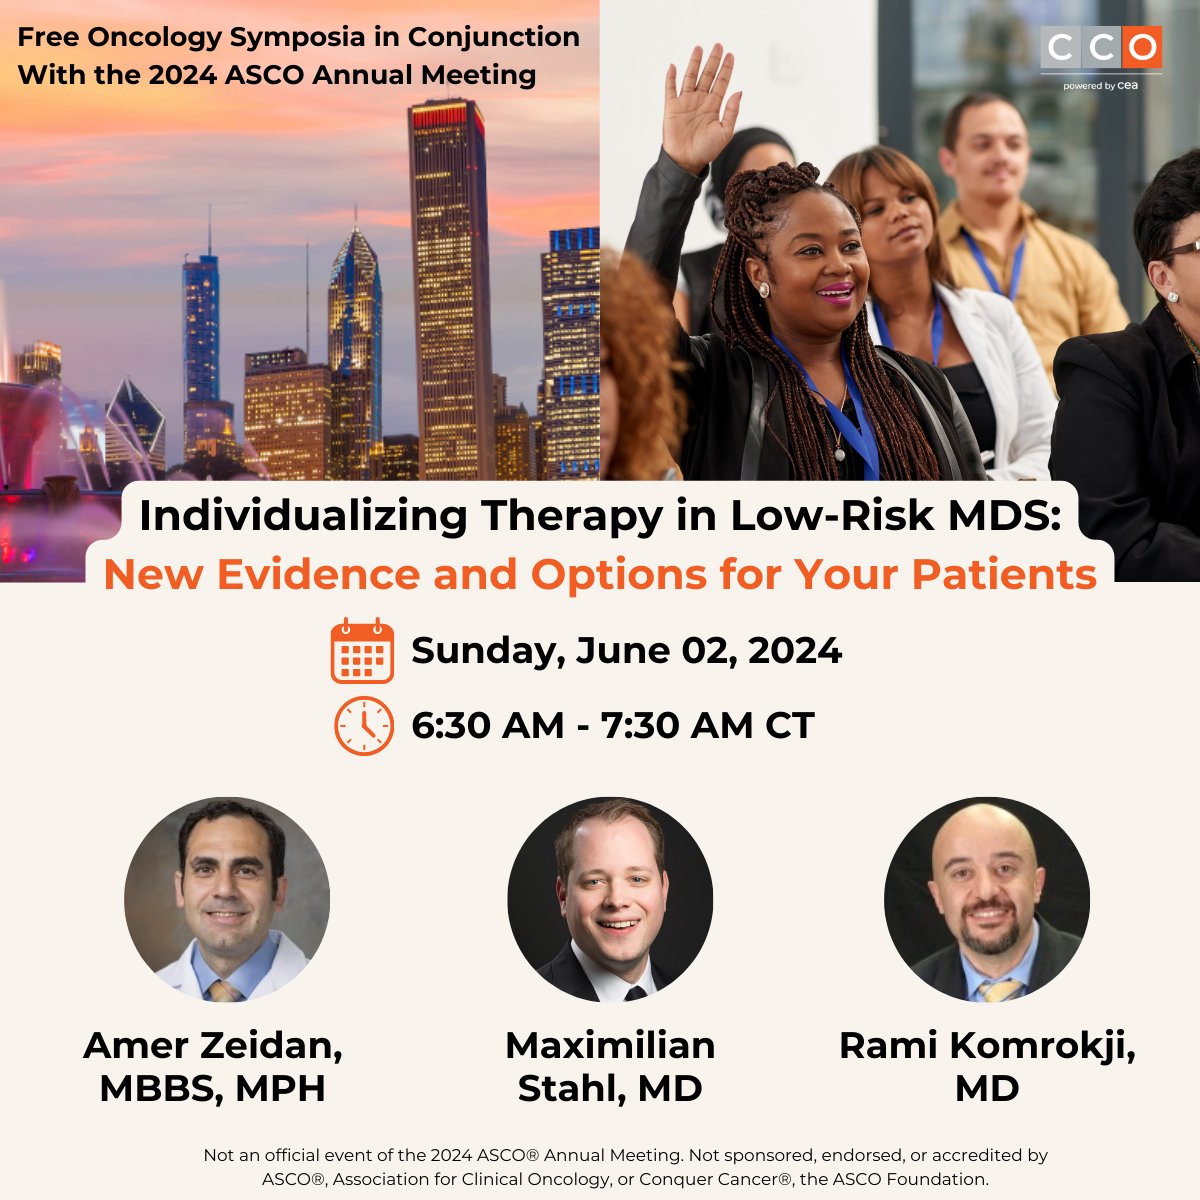 I’m excited to be at the #OncologySymposia in Conjunction With #ASCO2024 @CCO_Education

Join me for a #CME webinar, we’ll discuss the latest data on managing #anemia in patients with low-risk #MDSsm with @MaxStahlMD @Ramikomrokji 

Register here👉 clinicaloptions.com/events/anemia-…